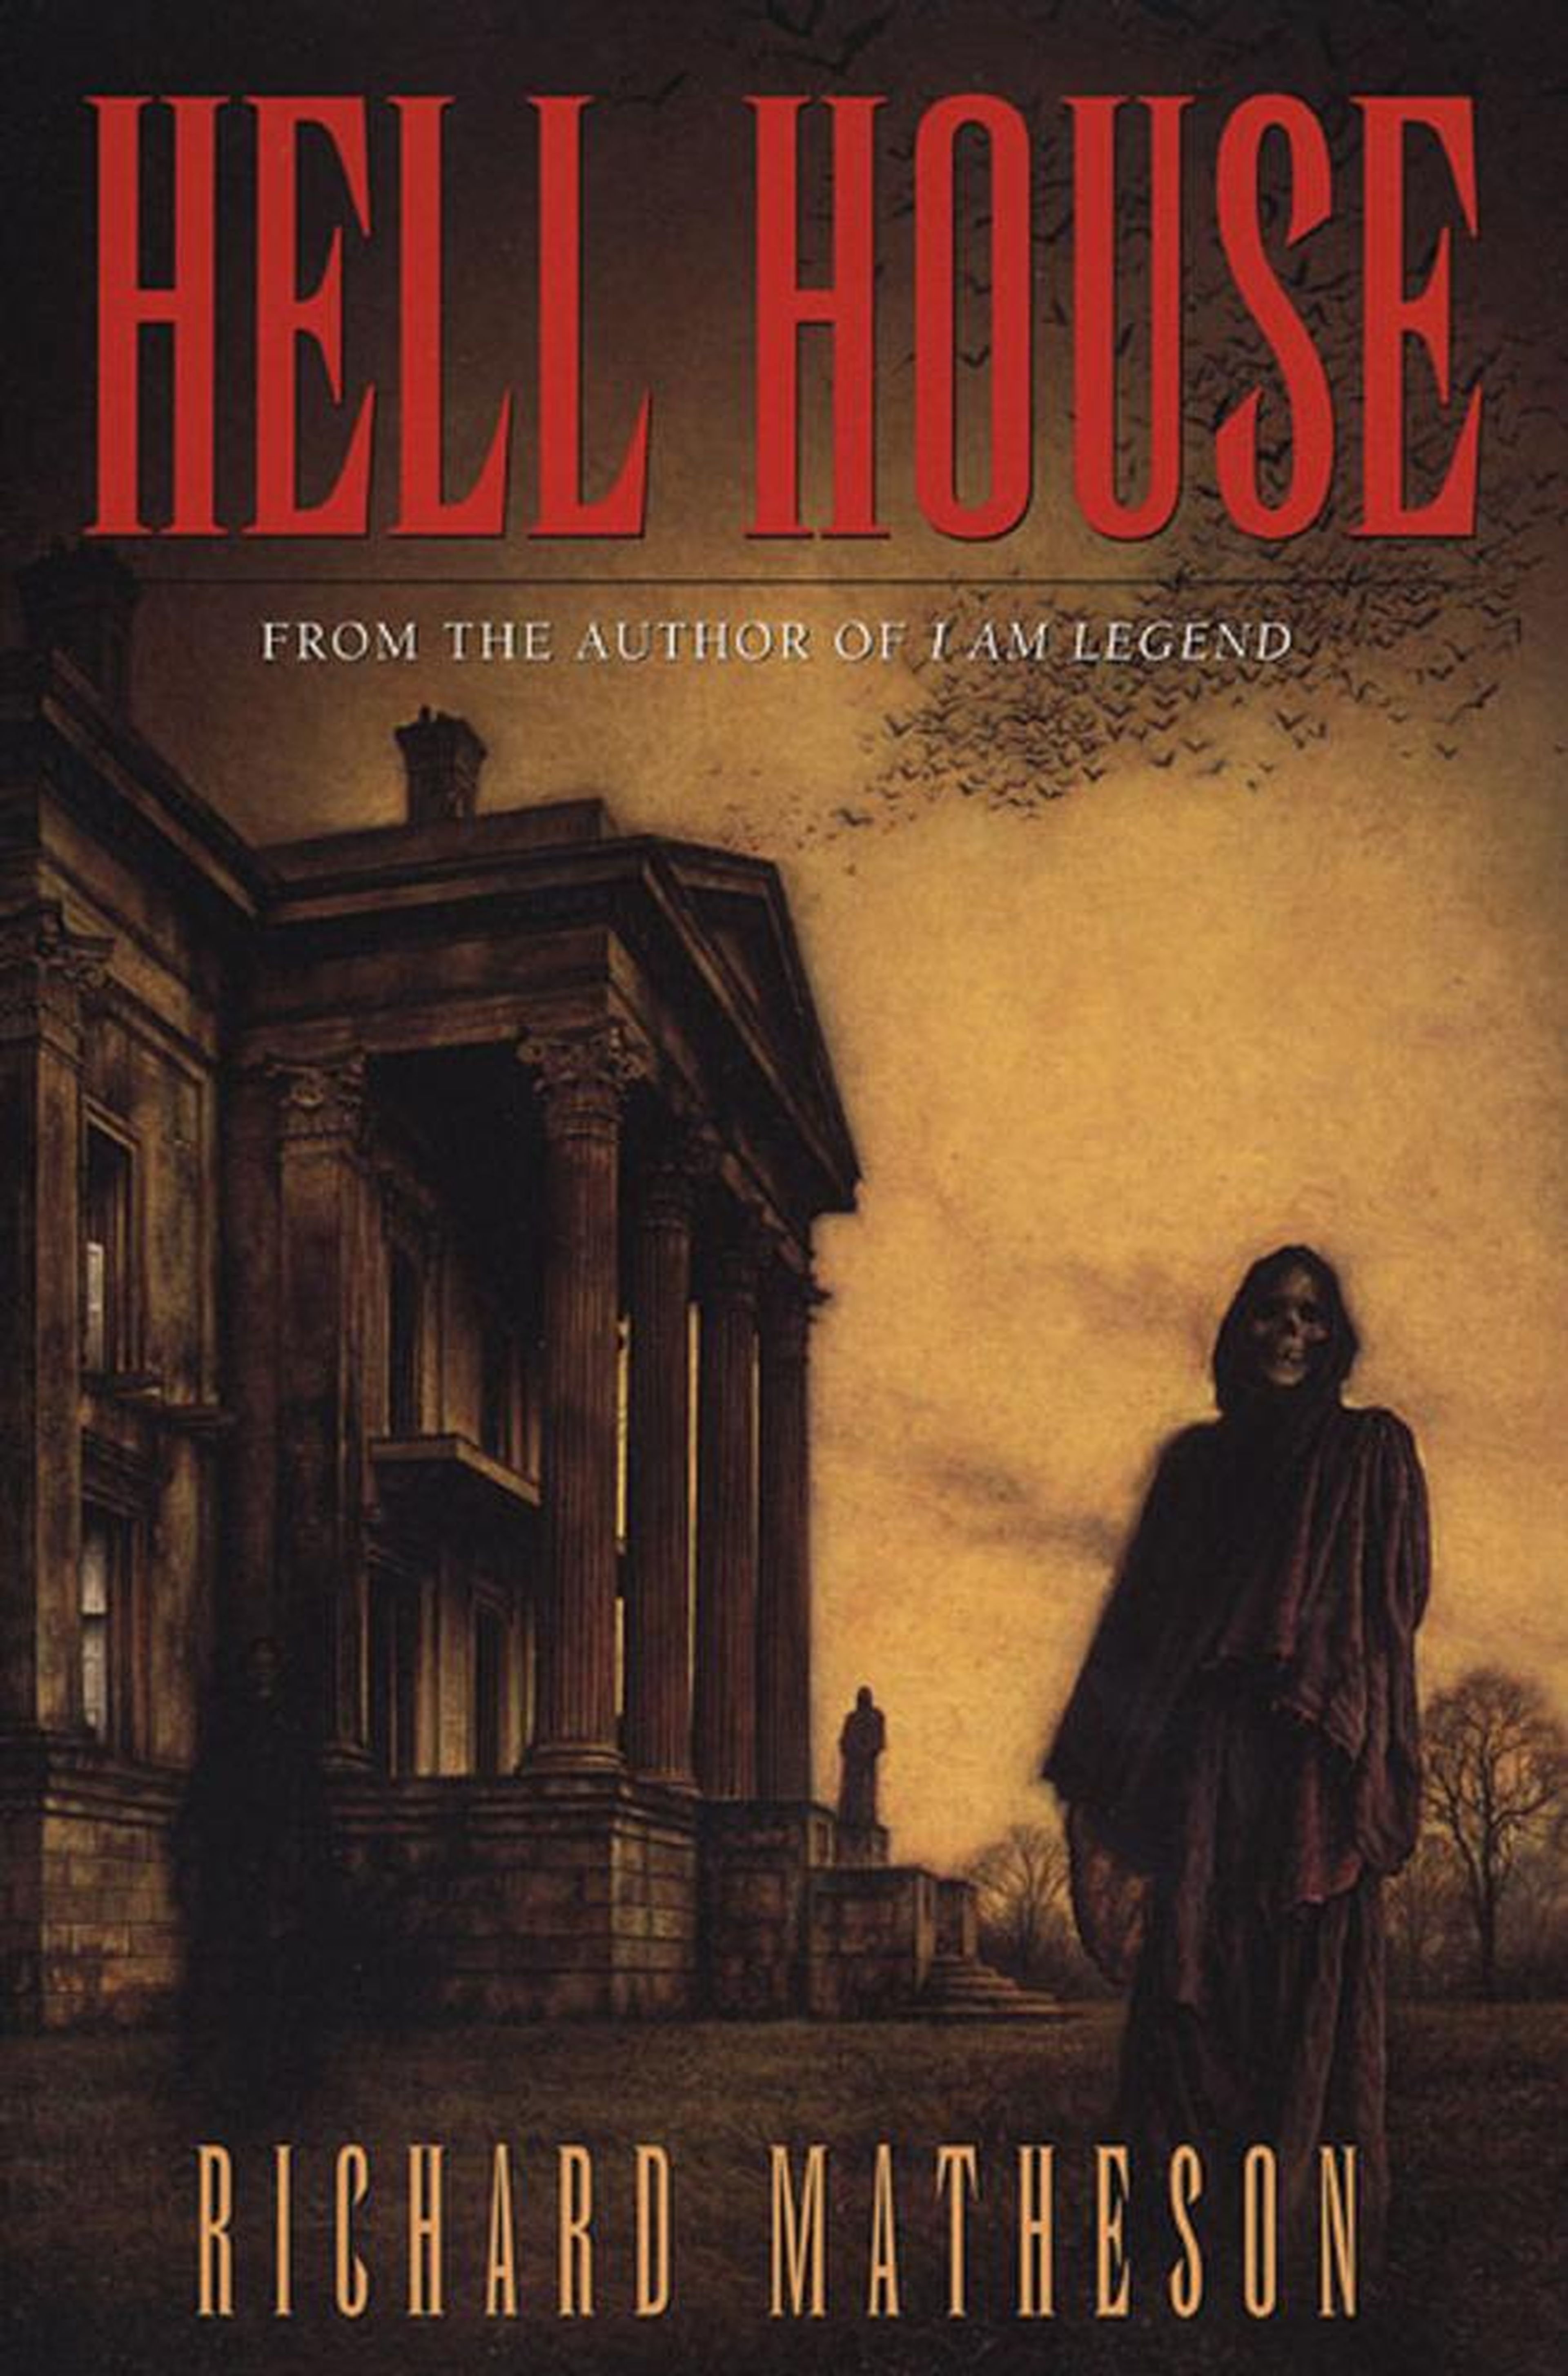 "Hell House."